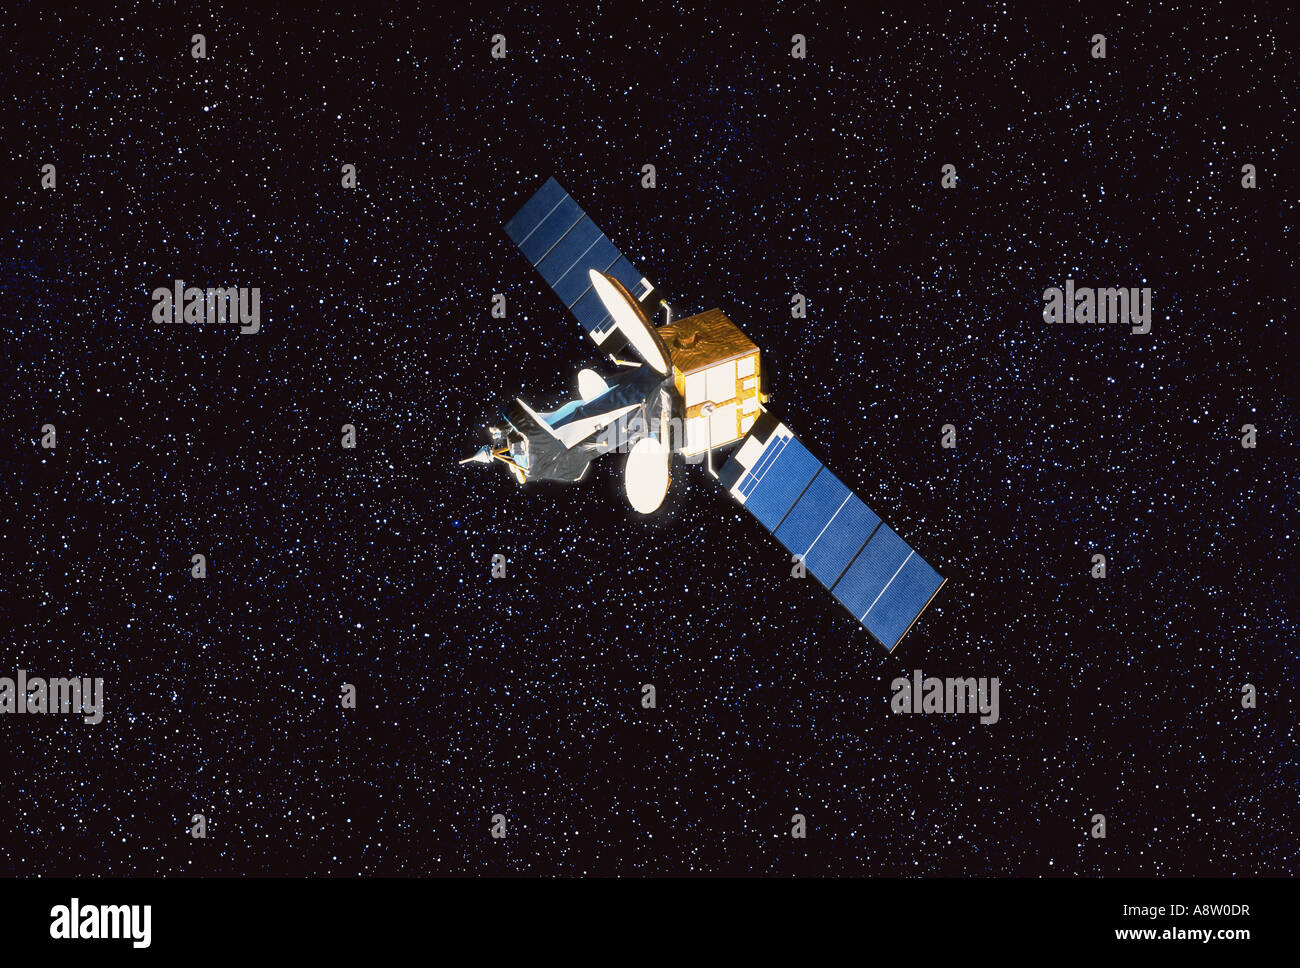 Communications satellite in Earth's orbit  with solar panels deployed. Stock Photo